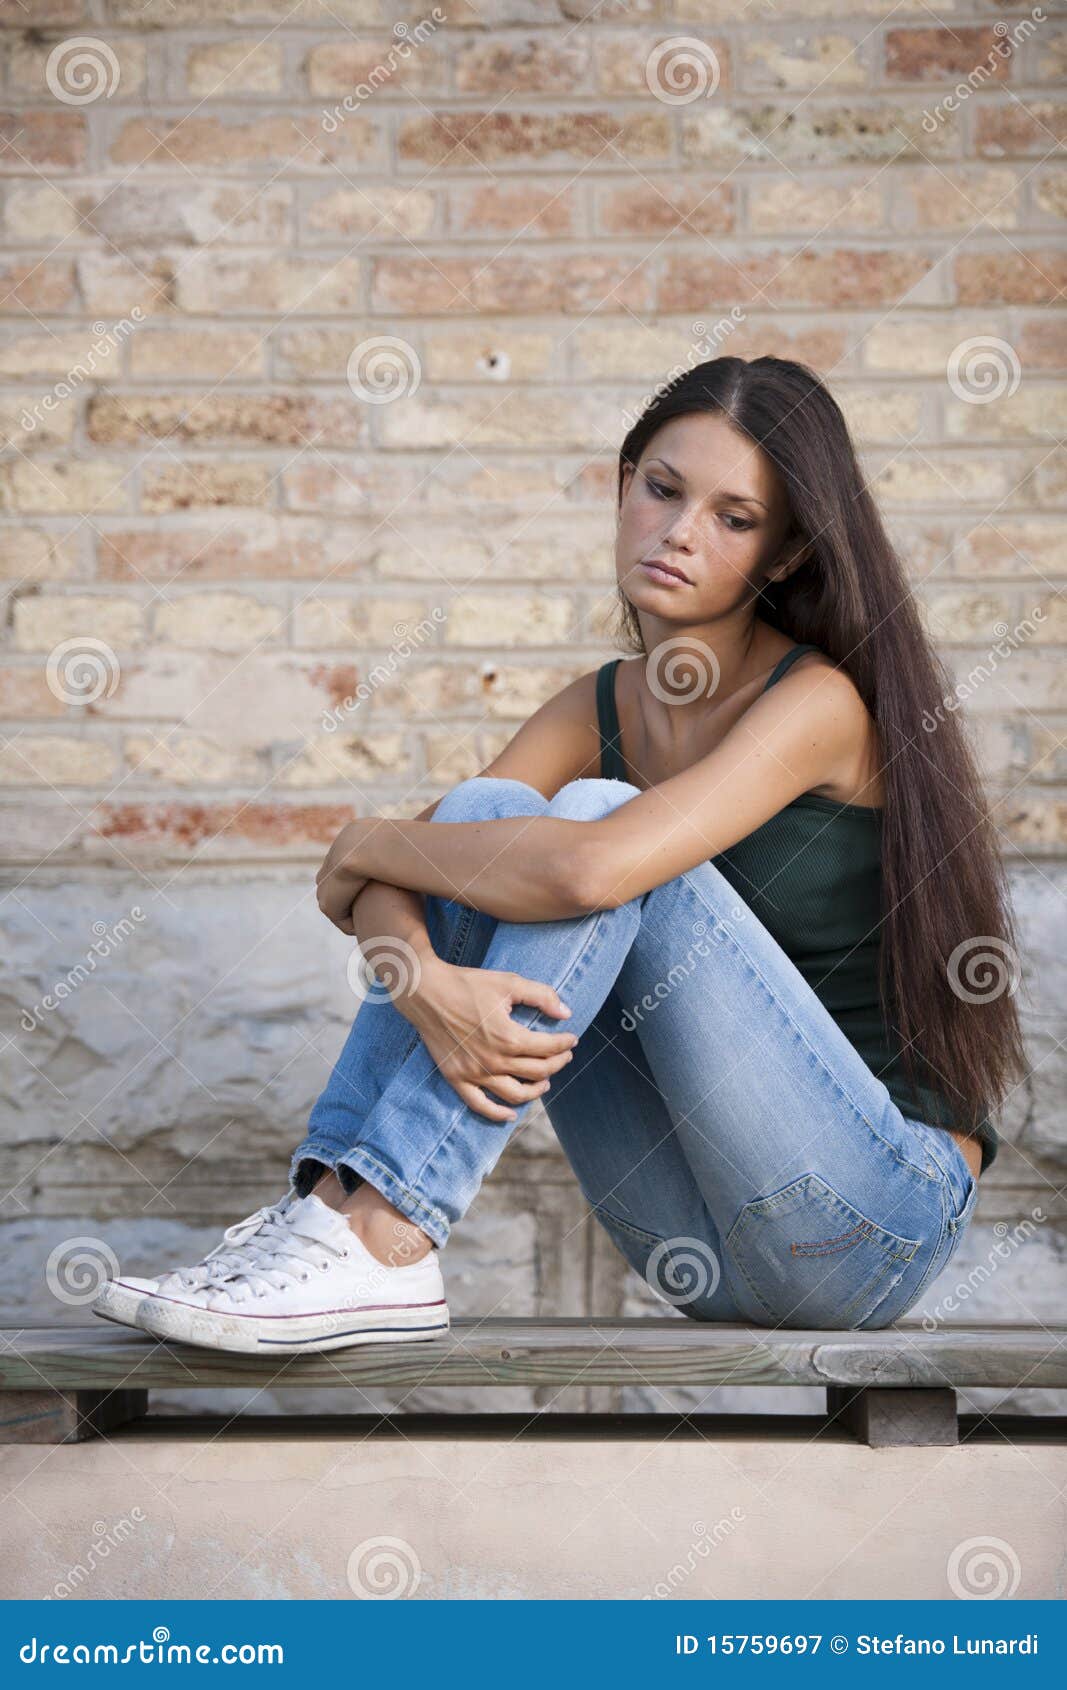 Teenagers problems stock image. Image of emotional, frustration - 15759697